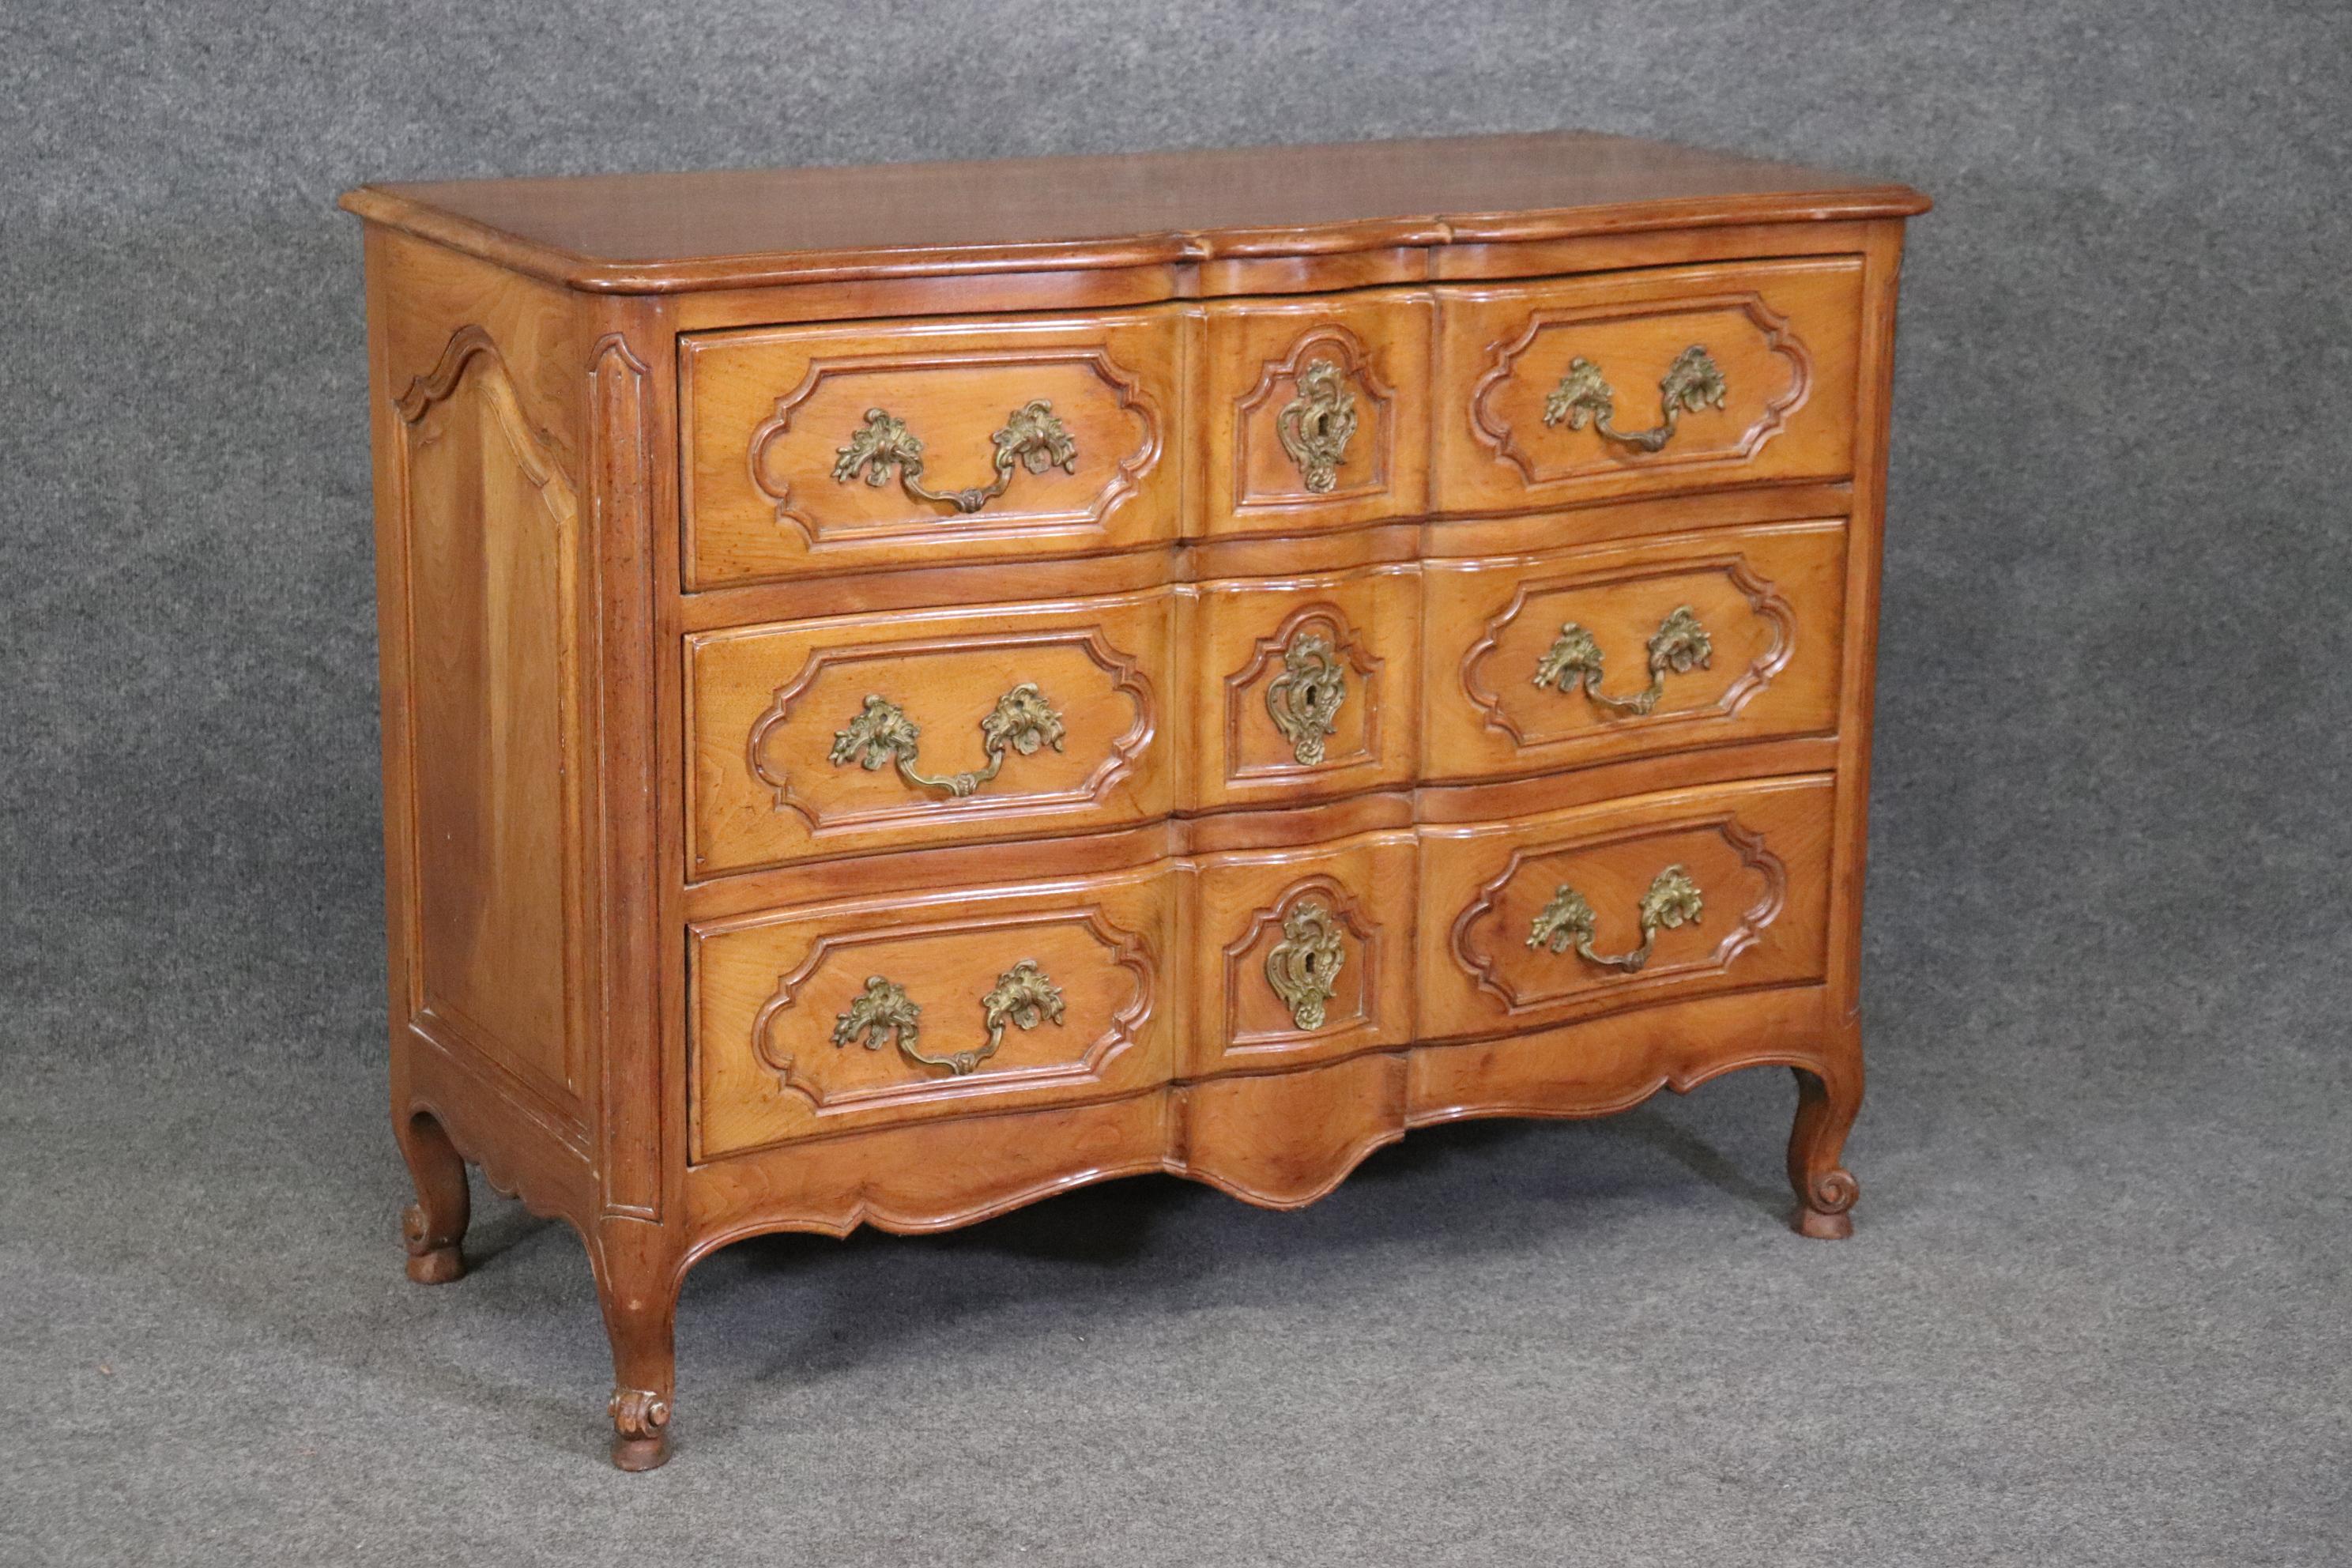 This is a superb, extremely high quality solid walnut and oak commode attributed to Auffray Furniture. The piece is beautifully designed and has faux distressting to make it look like an actual antique. The piece has bronze hardware and is in good